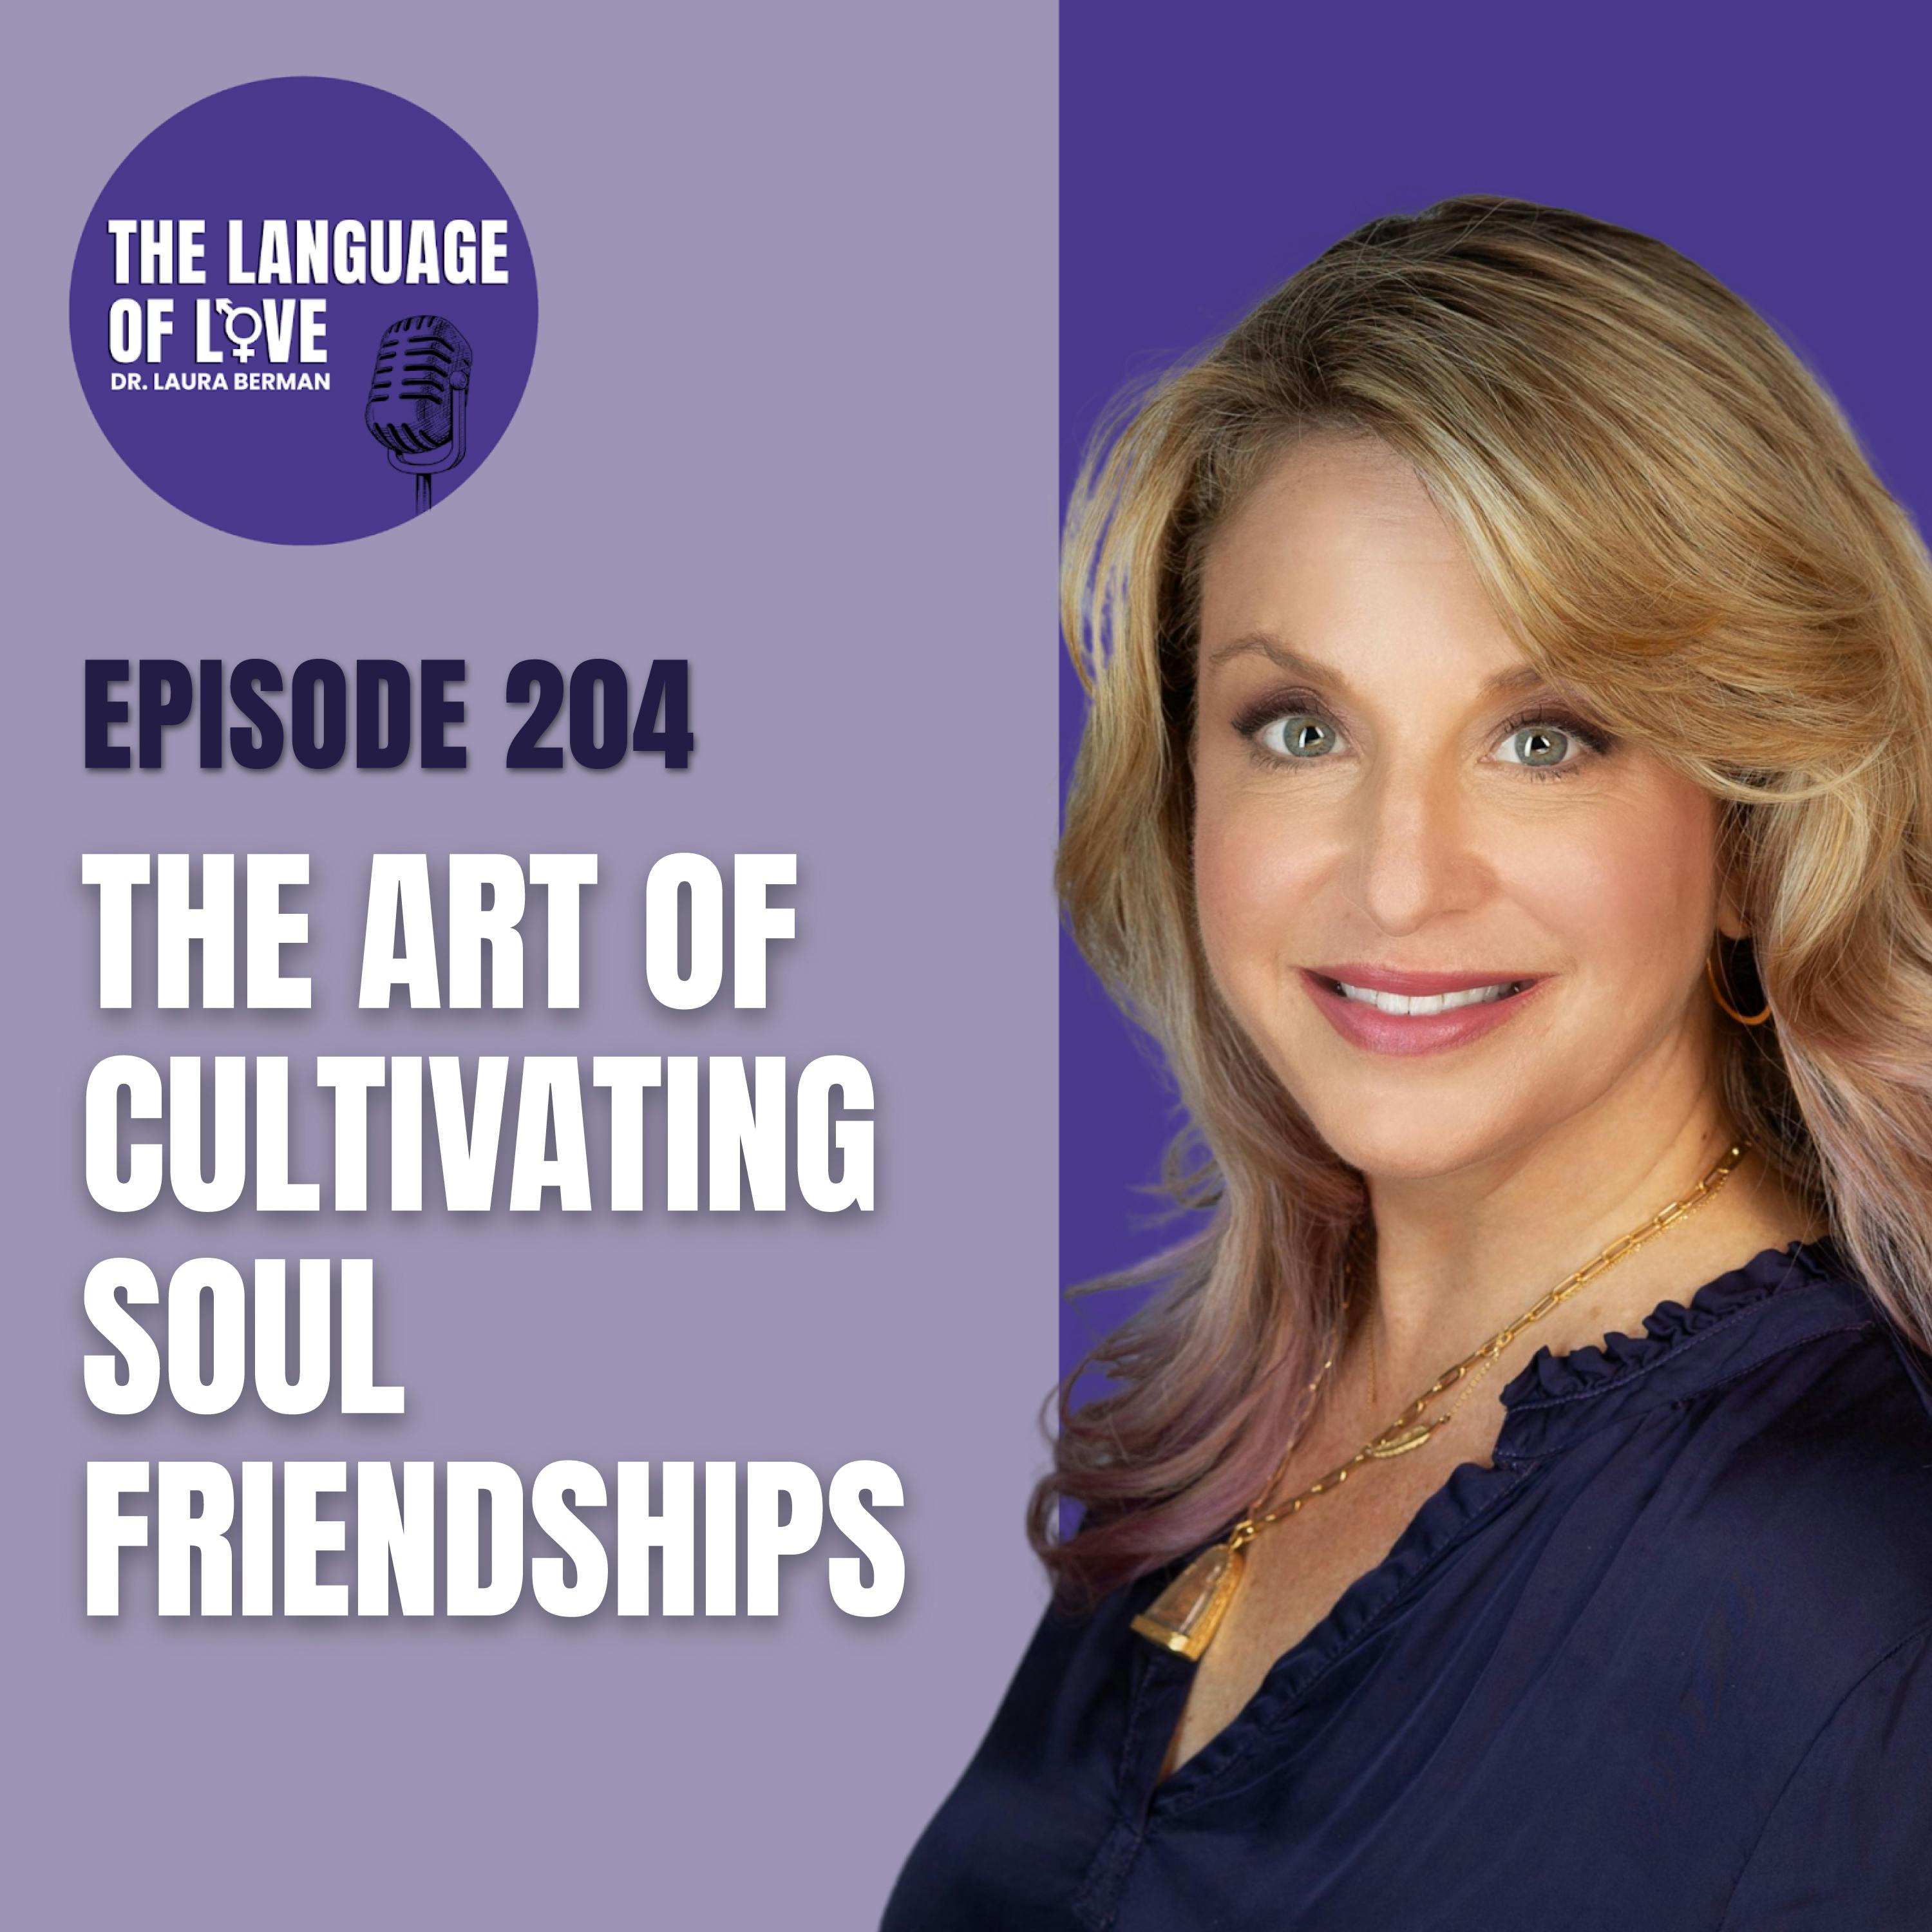 The Art of Cultivating Soul Friendships